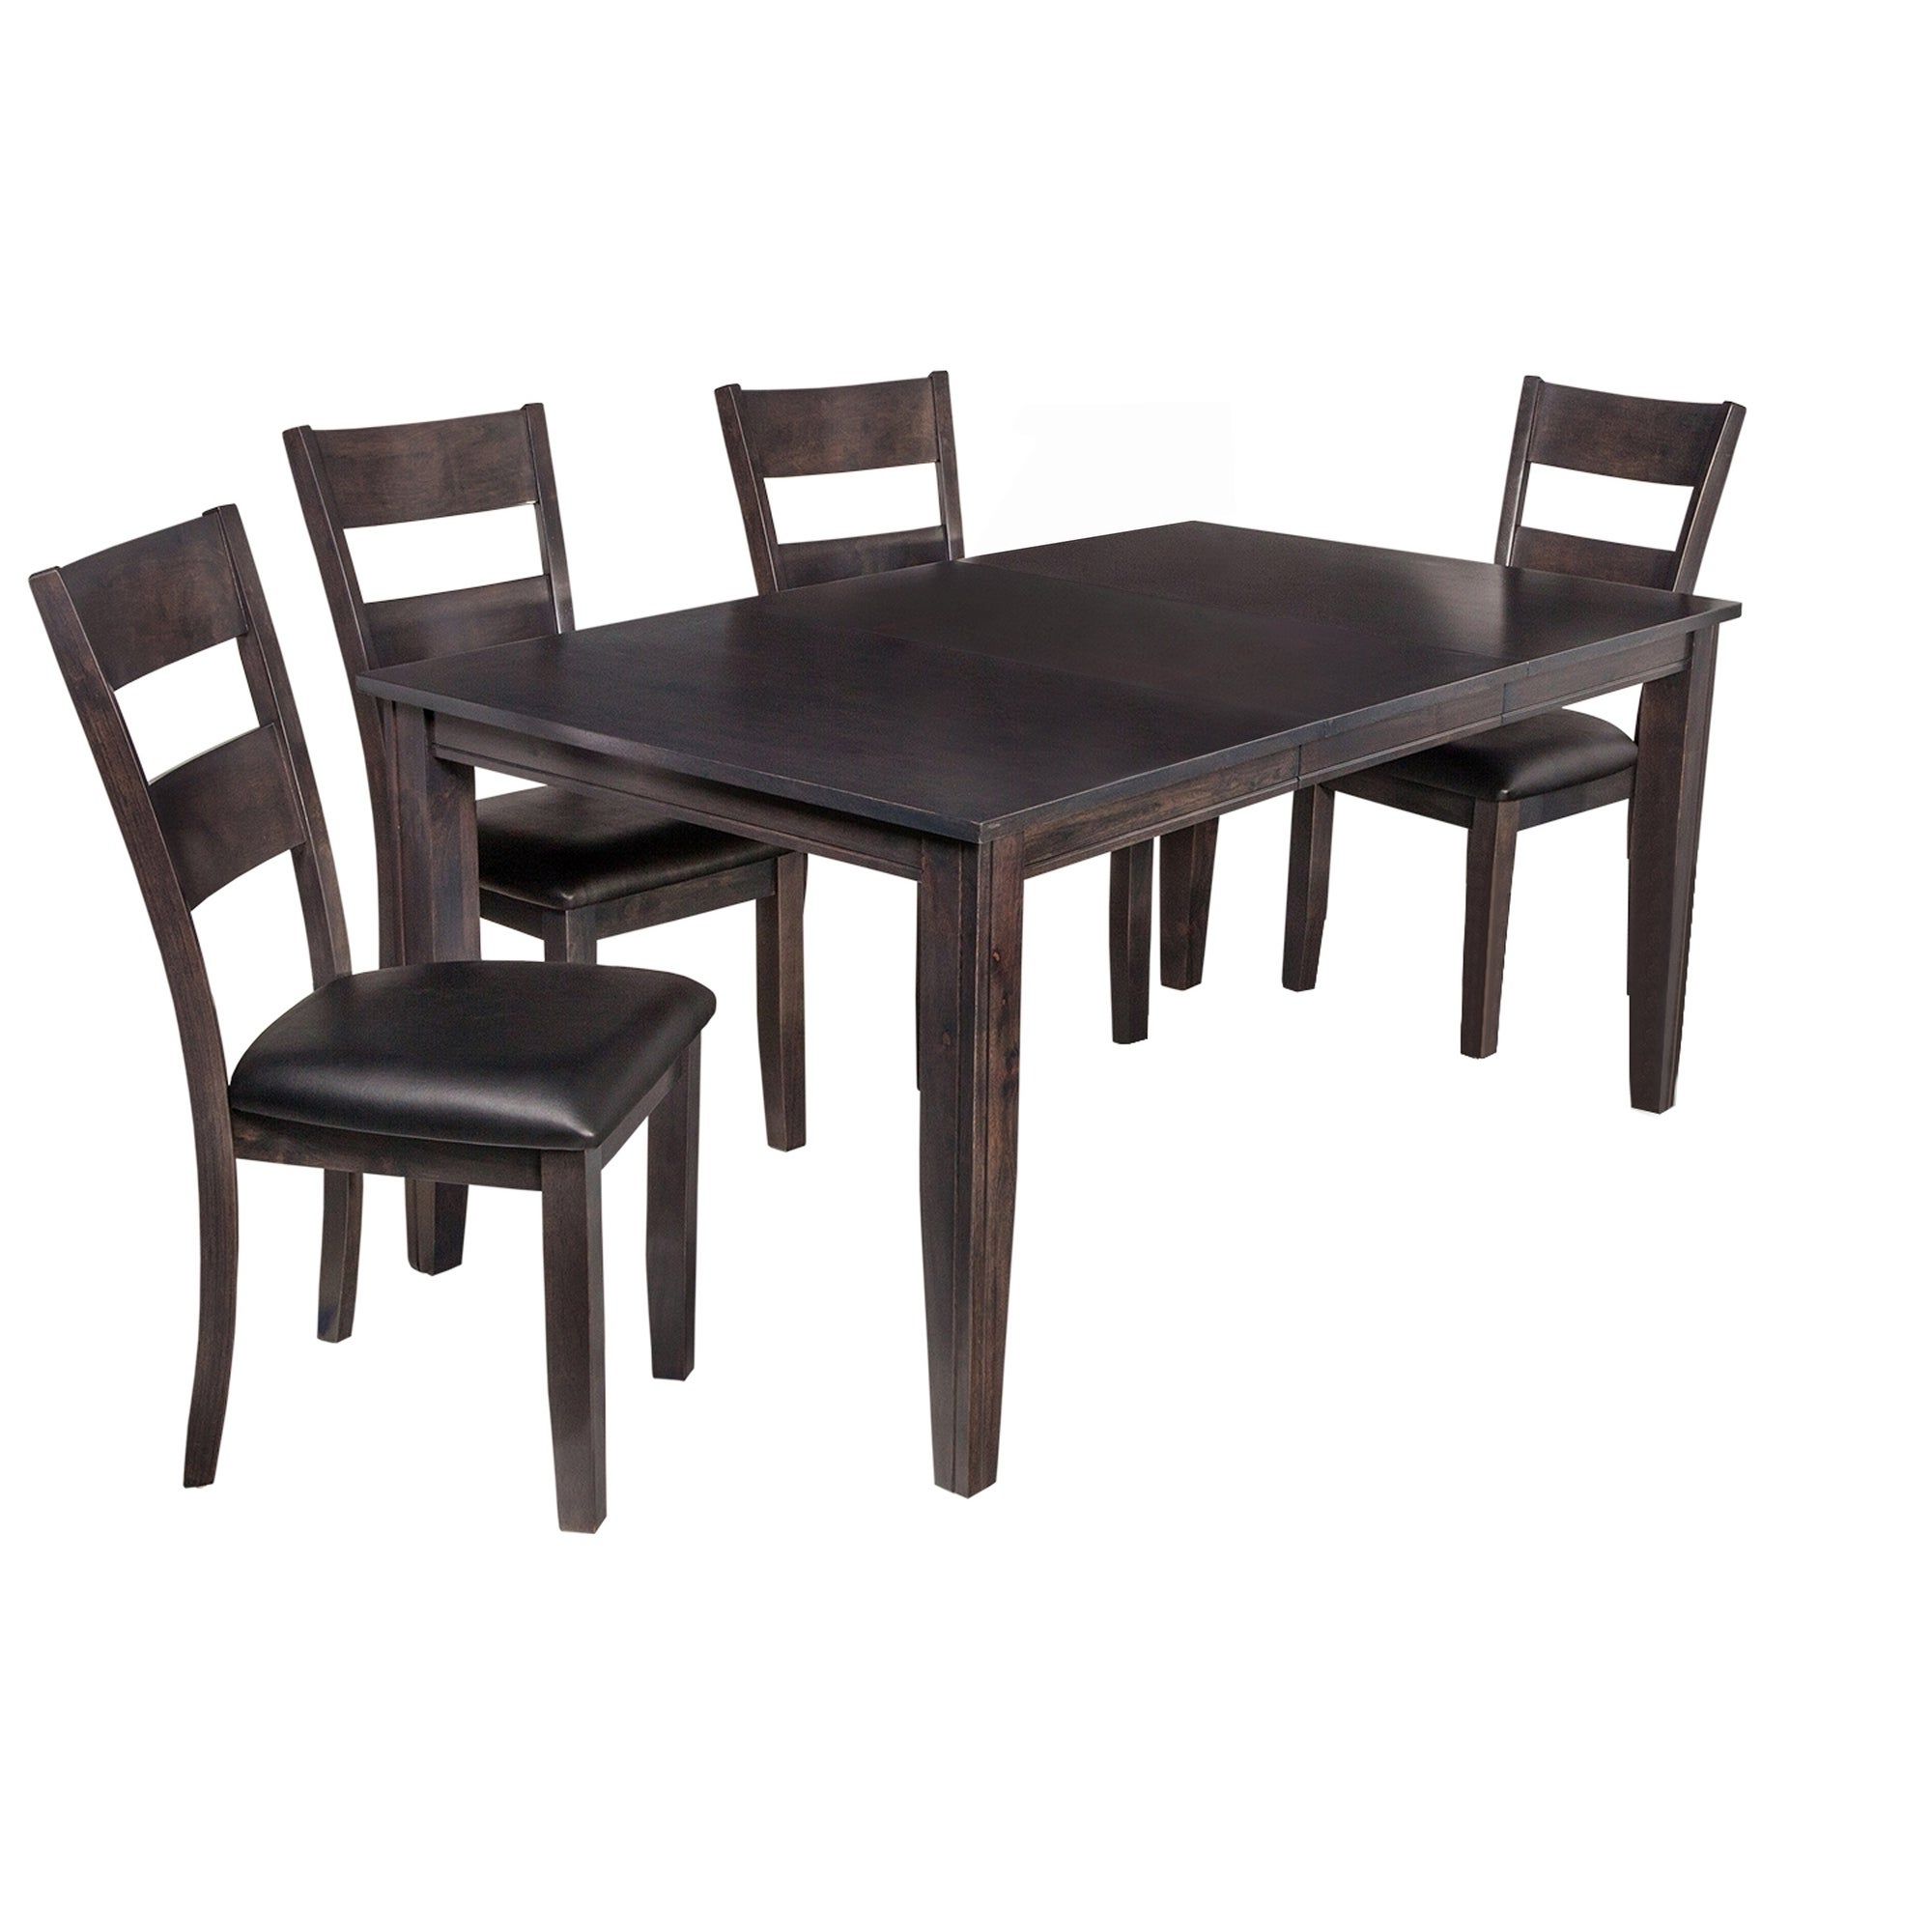 Shop 5 Piece Solid Wood Dining Set "aden", Modern Kitchen Table Set Pertaining To 2019 Adan 5 Piece Solid Wood Dining Sets (set Of 5) (Photo 4 of 25)